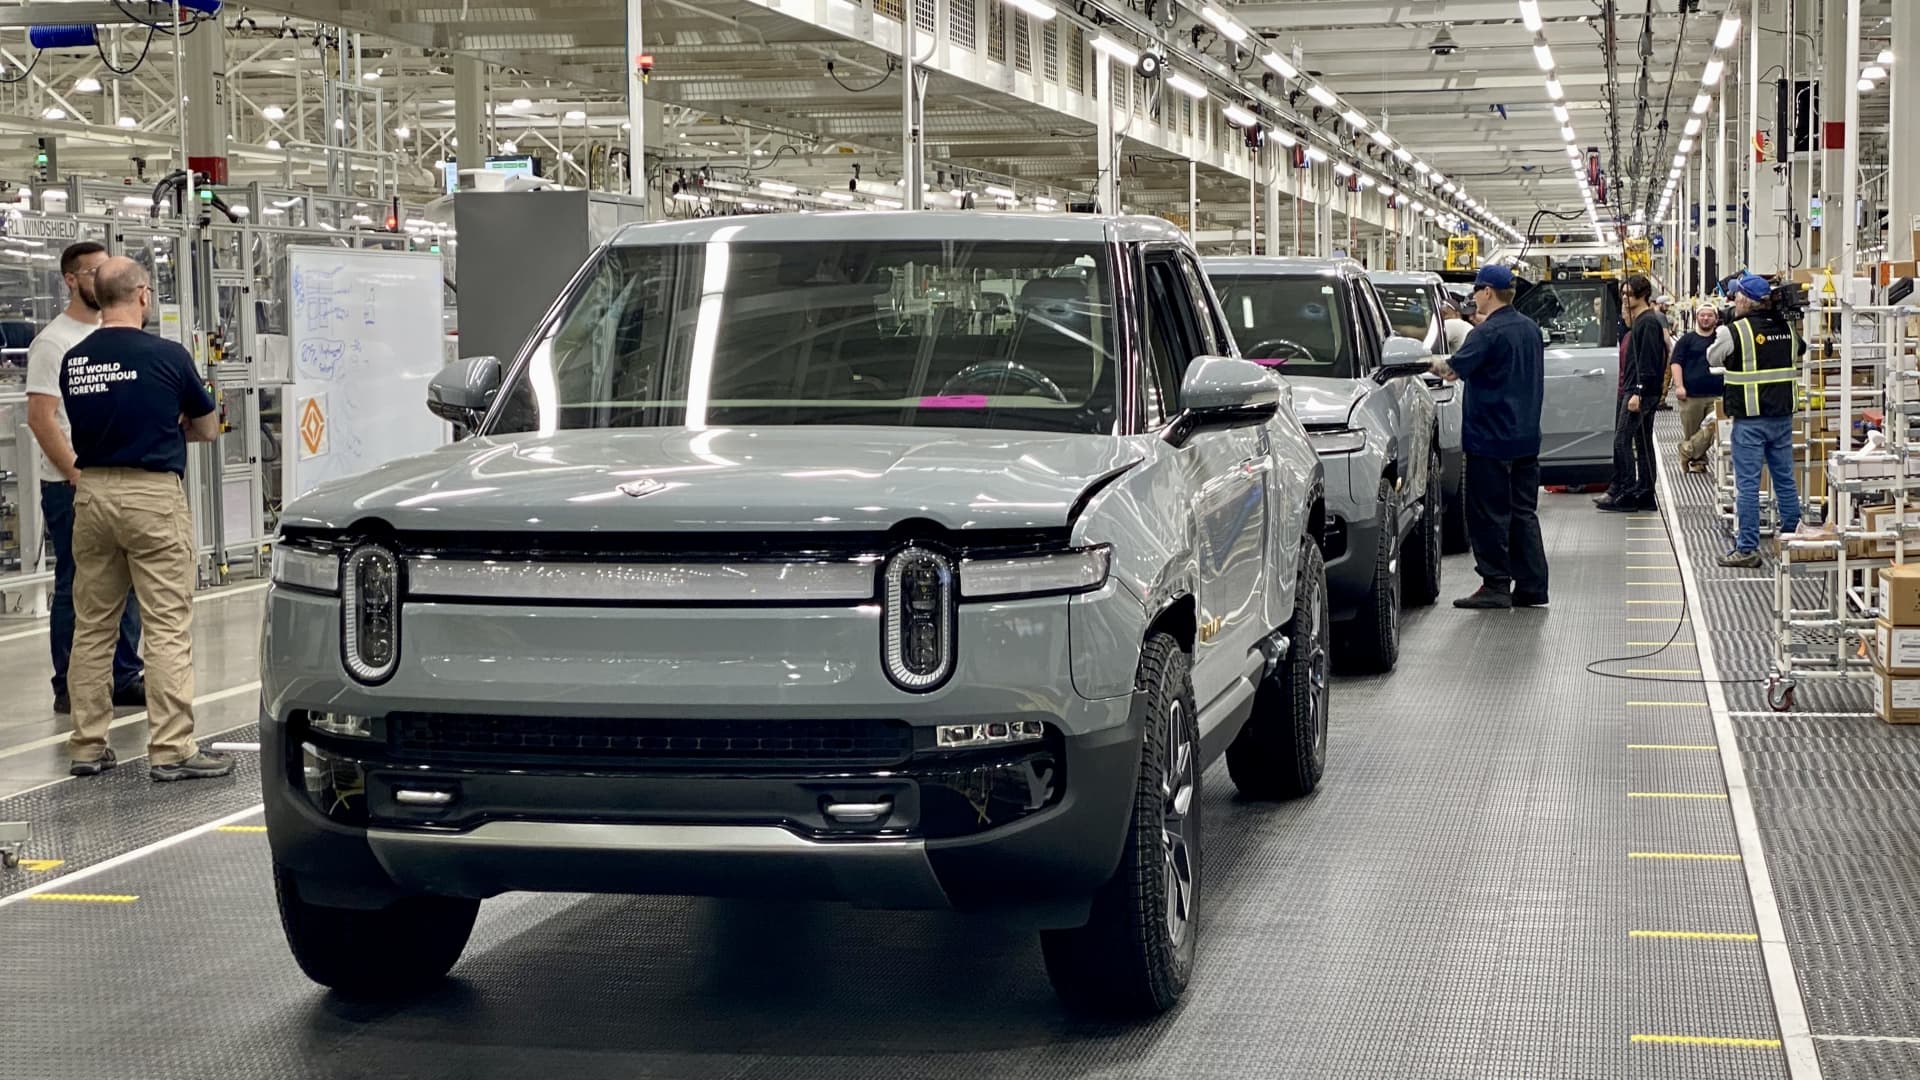 Rivian shares slumped after the company announced a big recall